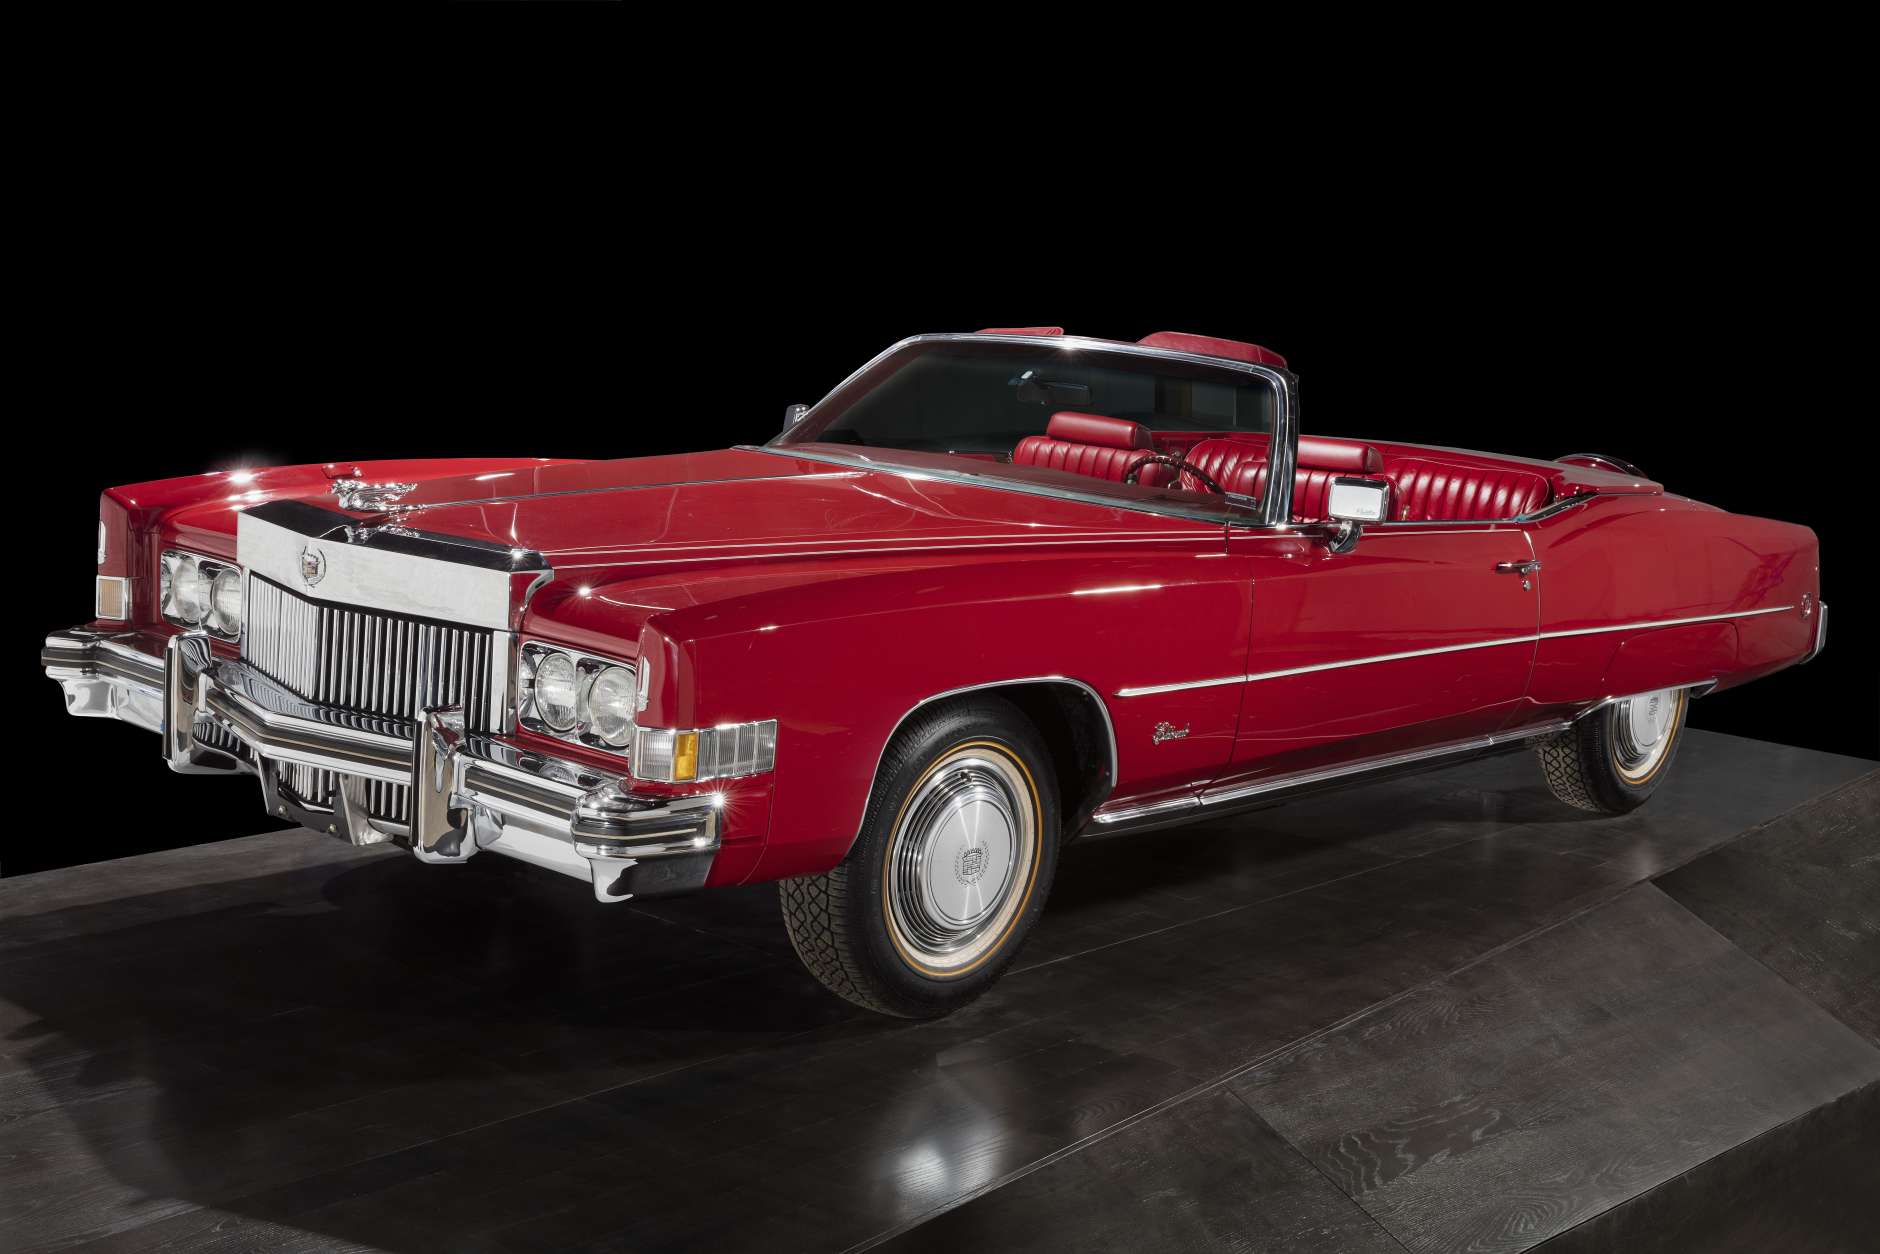 Red Cadillac Eldorado owned by Chuck Berry 1973 (Photo courtesy Collection of the Smithsonian National Museum of African American History and Culture)